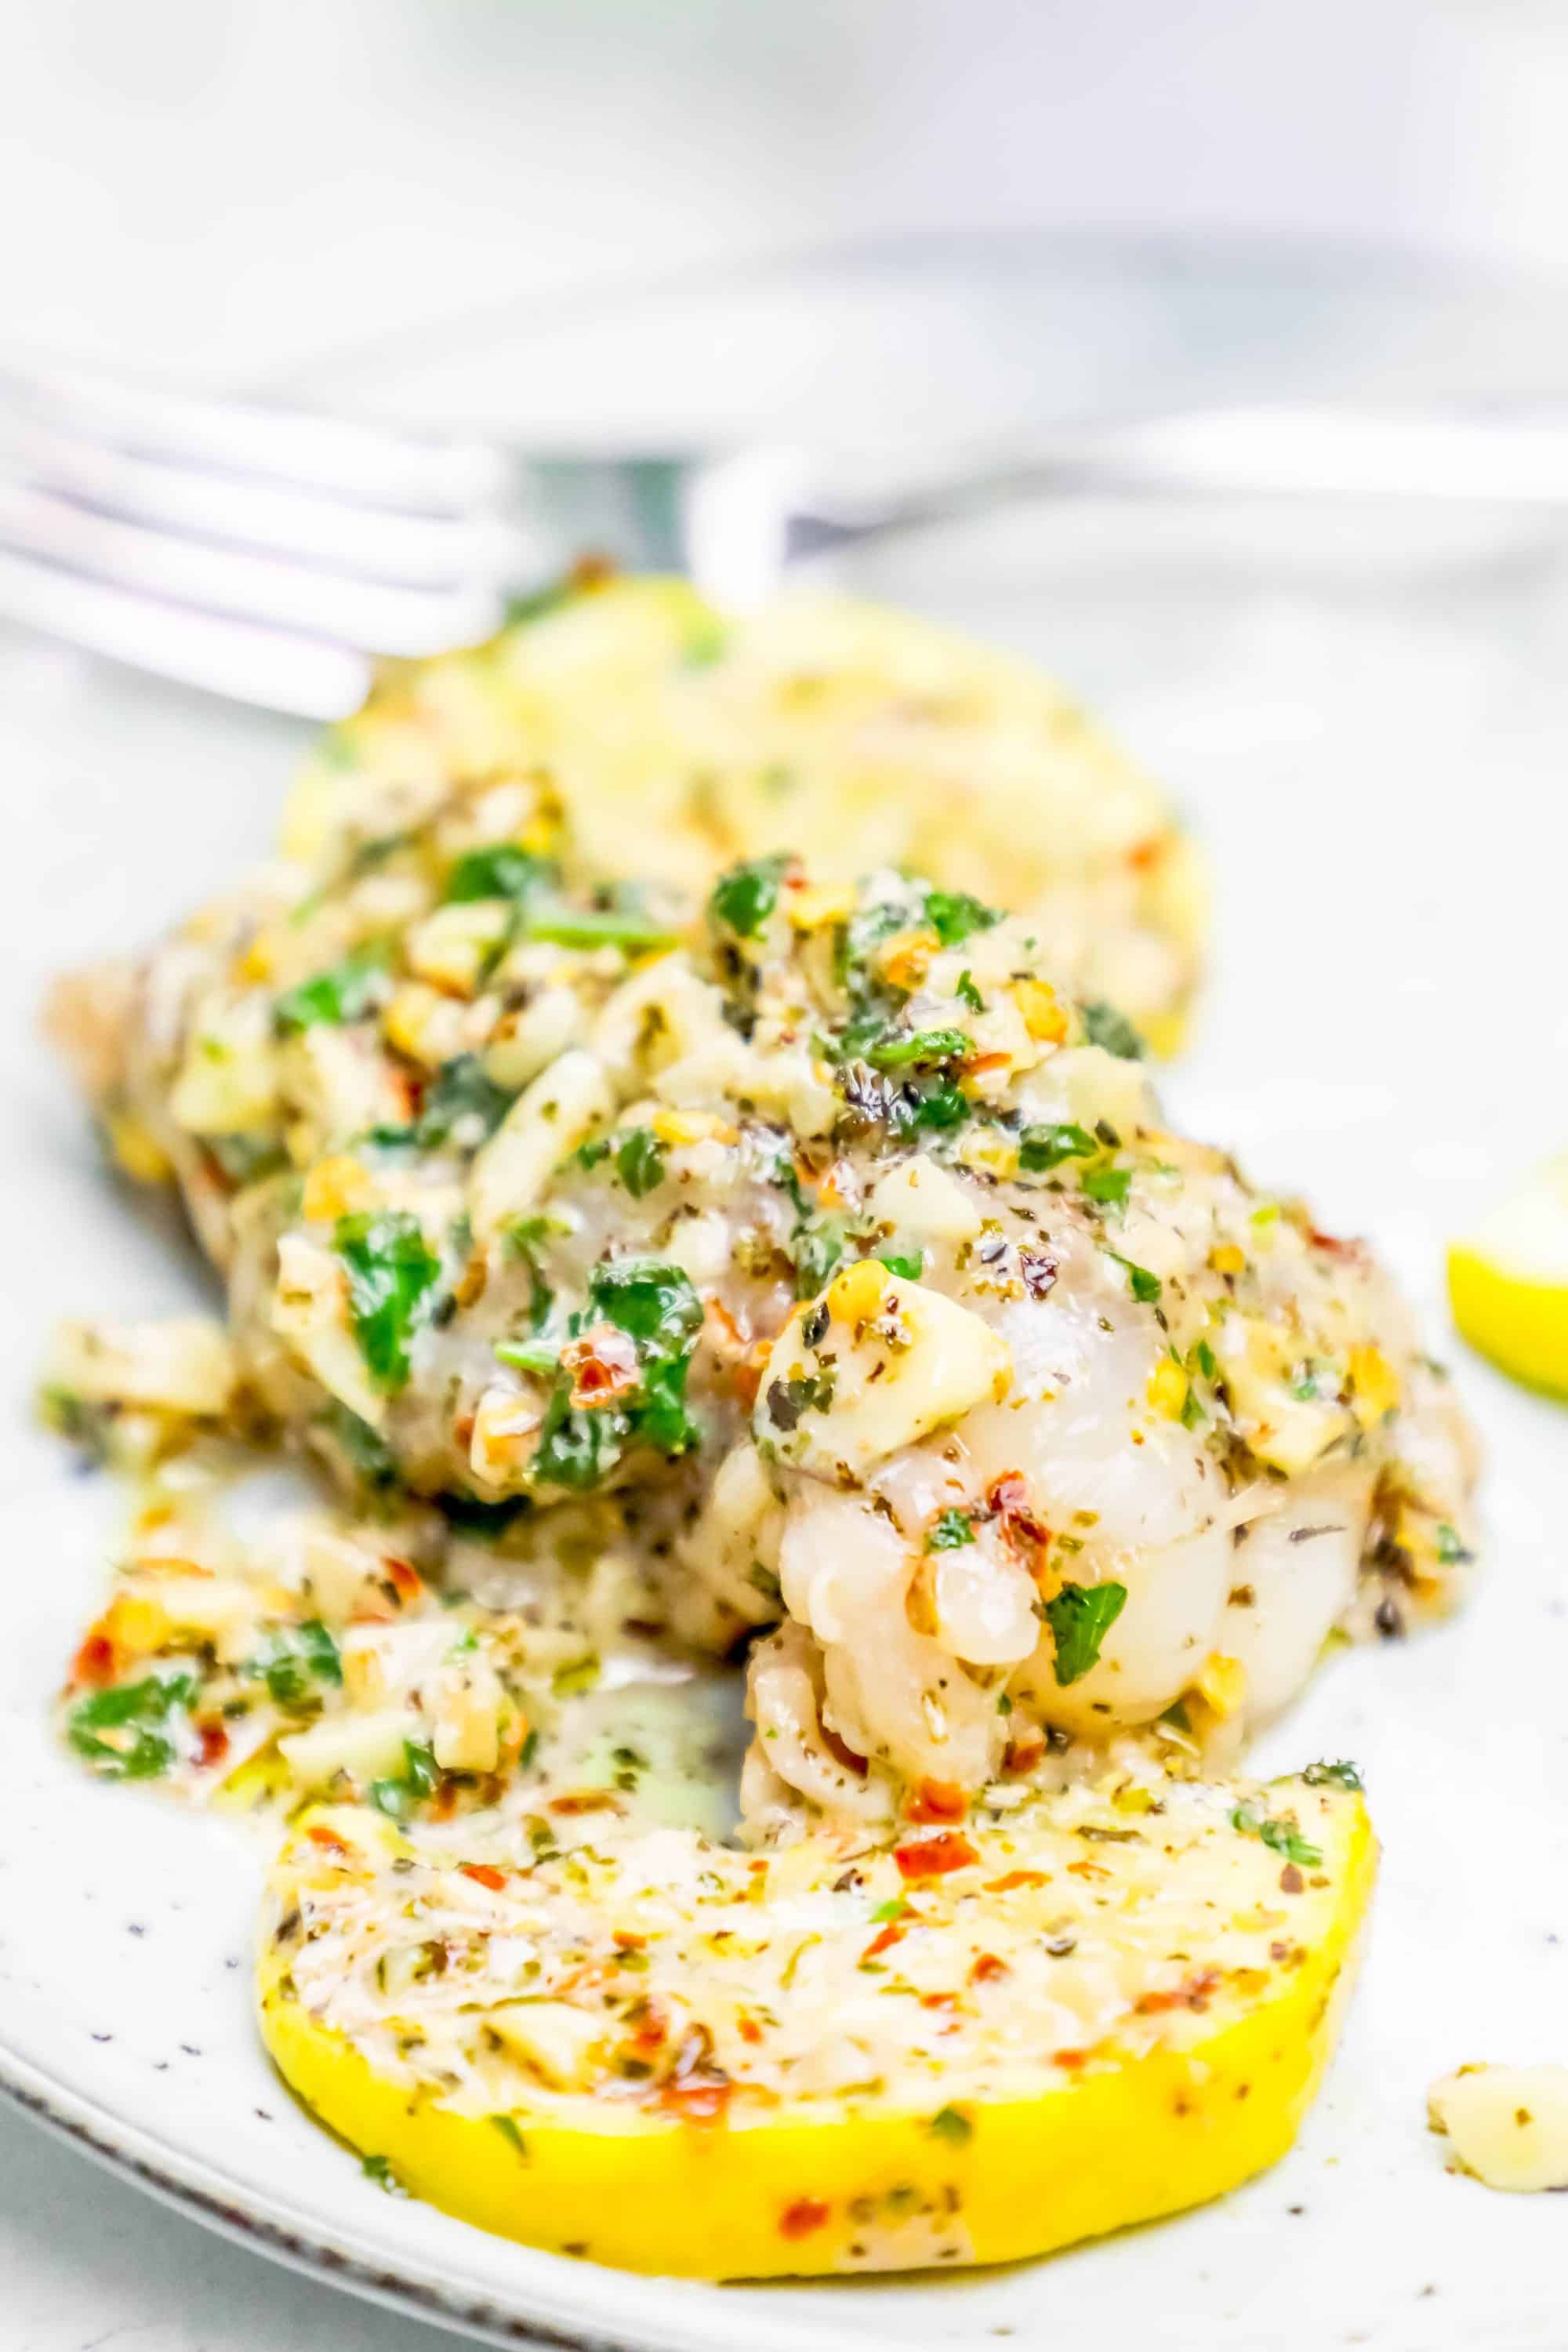 chicken with lemony, garlic, spices on it